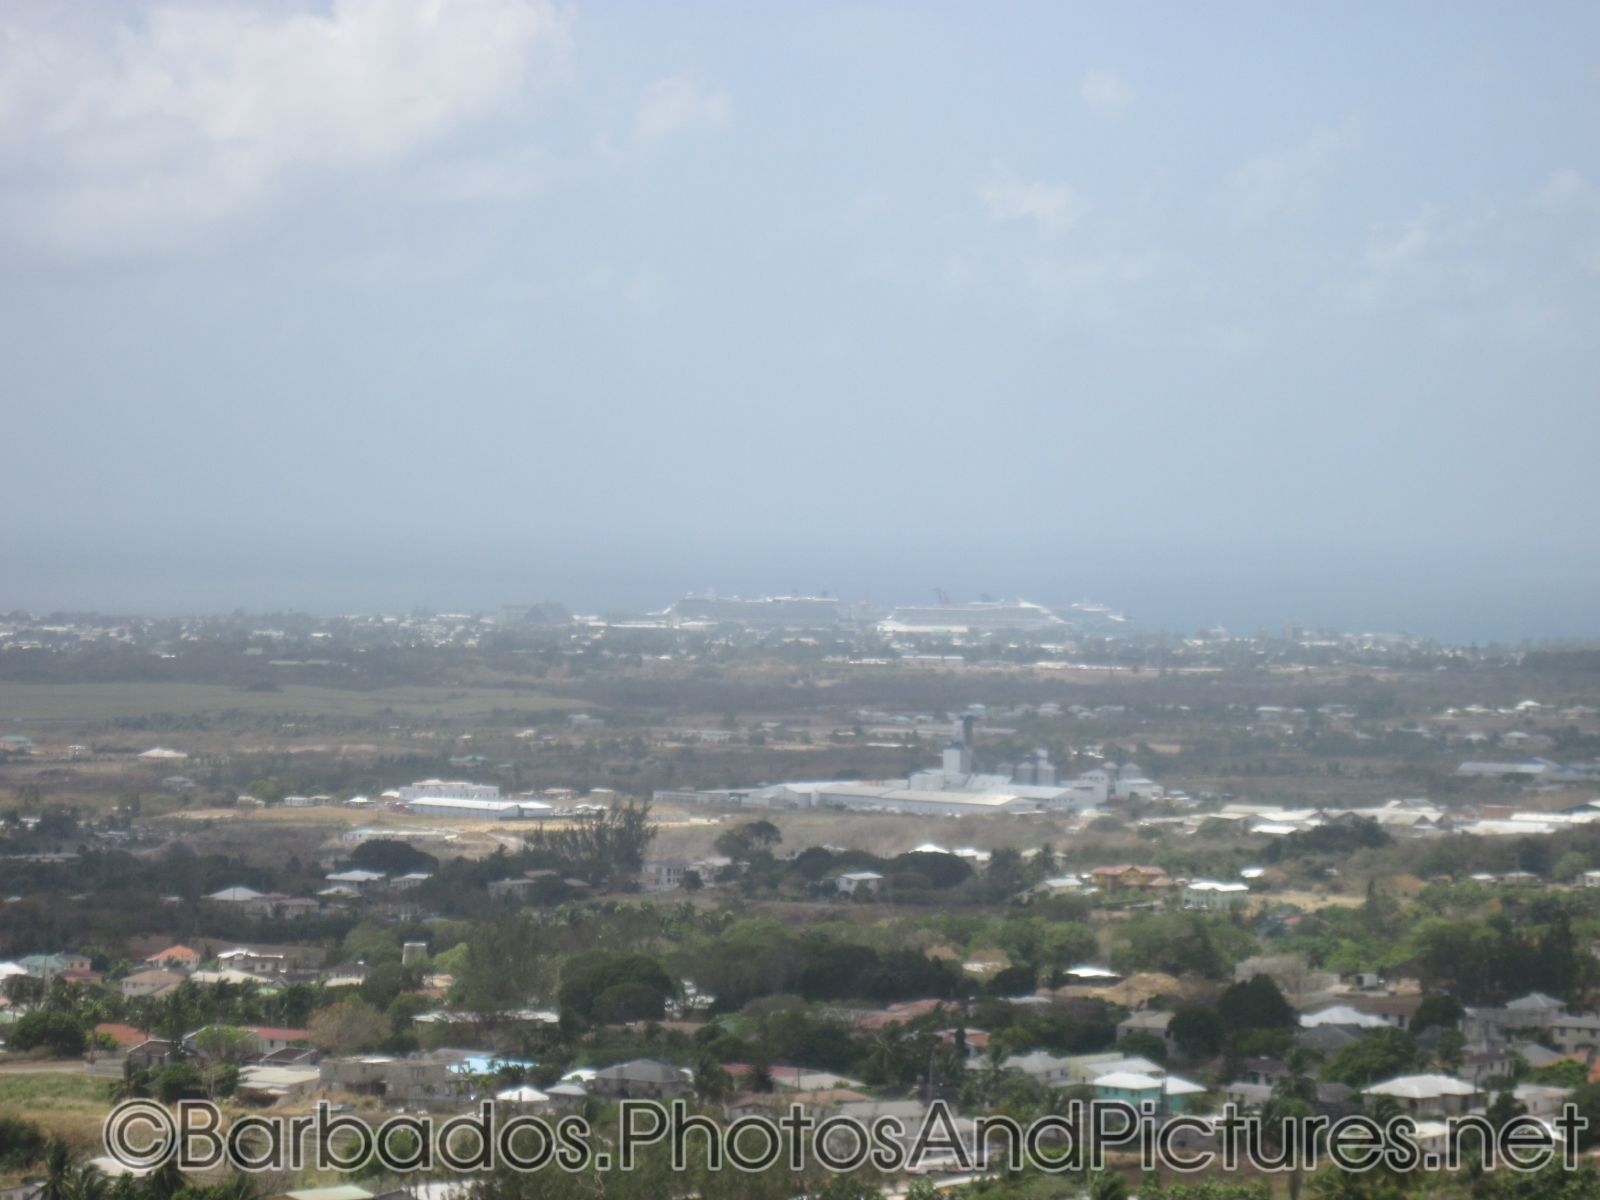 NCL and Carnival cruise ships viewed from Gun Hill Signal Station in Barbados.jpg
